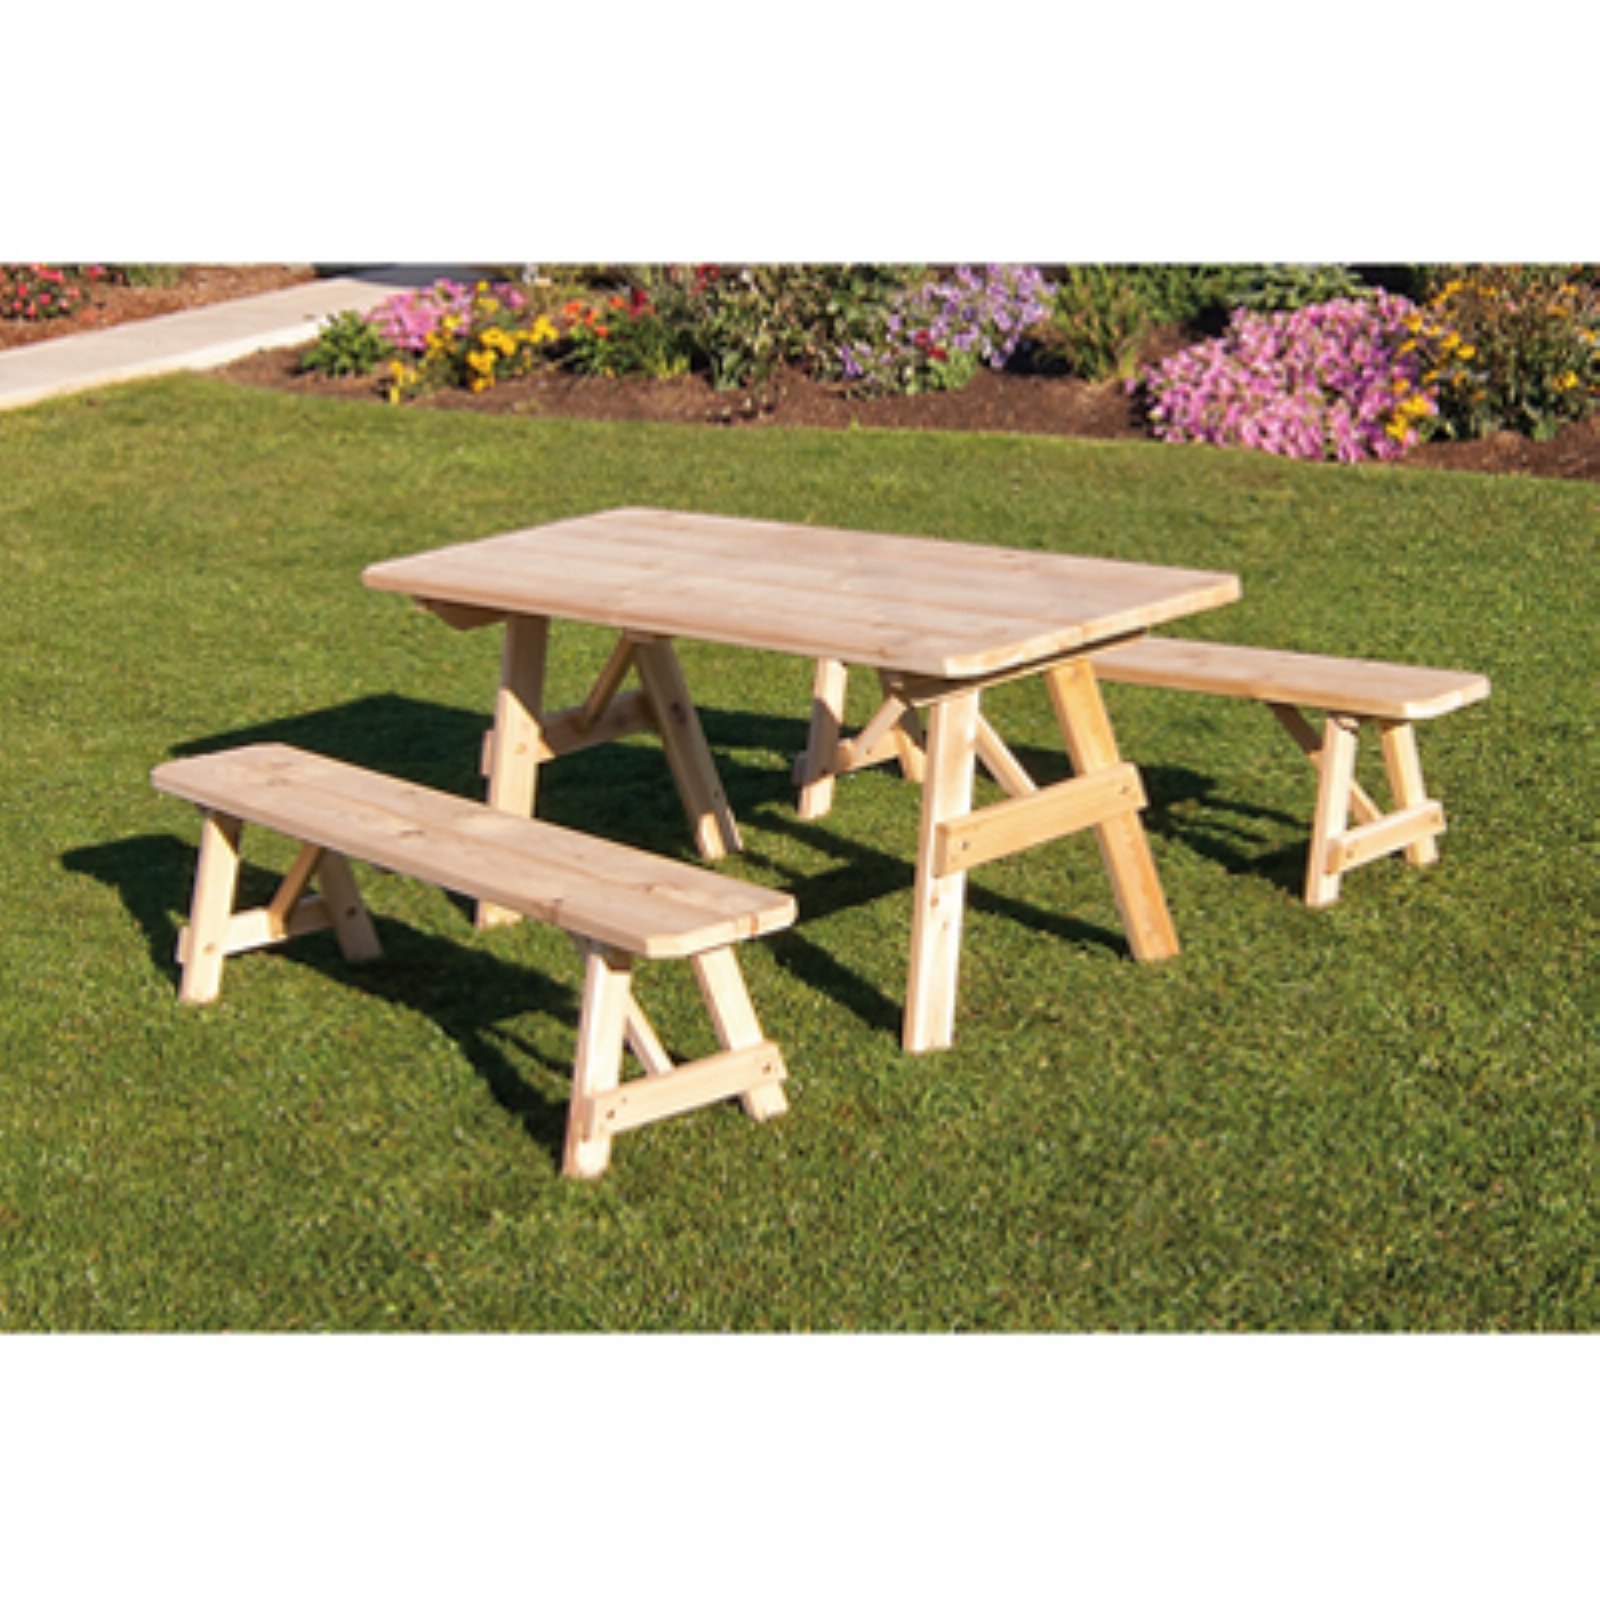 A &amp; L Furniture Western Red Cedar Traditional Picnic Table with 2 Side Benches - image 1 of 1